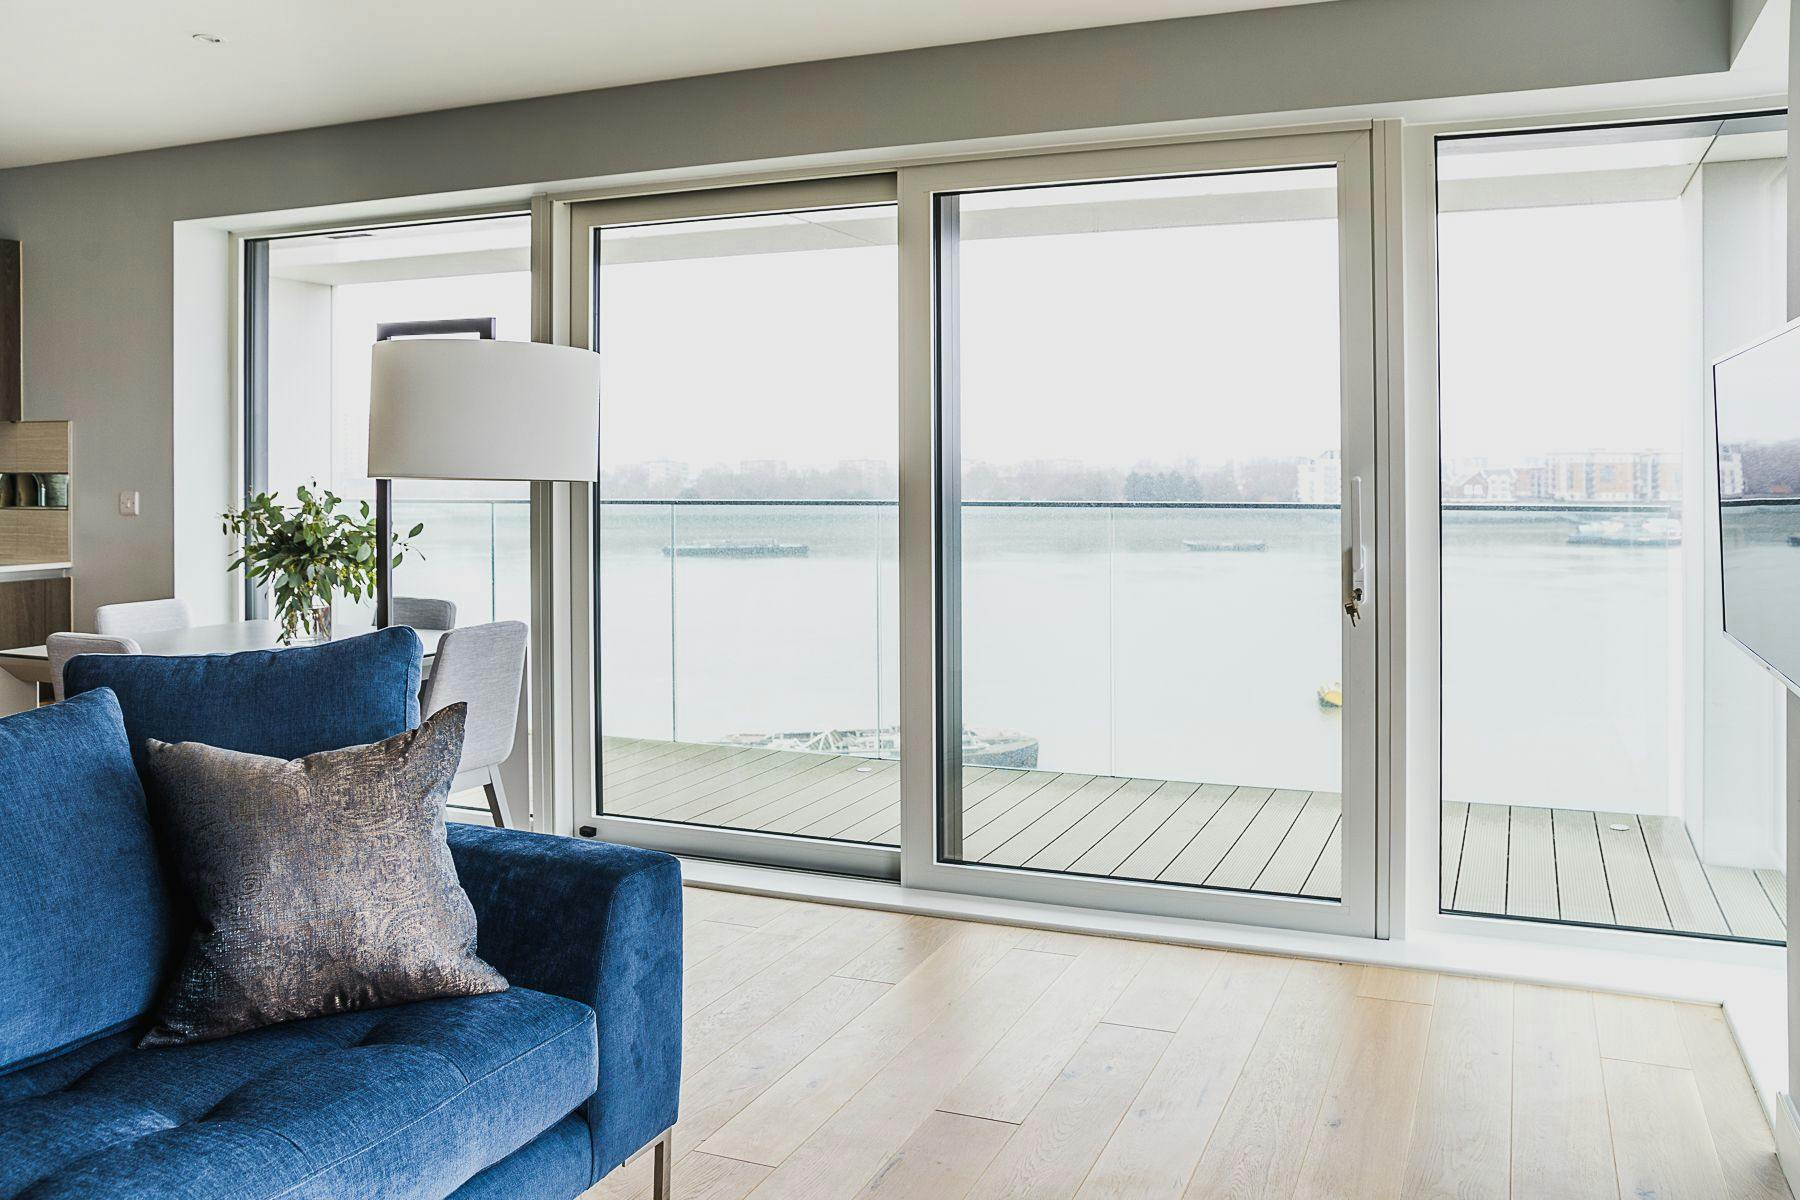 This riverside apartment was an elegant blank canvas, ideal for creating a calming sanctuary for a busy young couple.